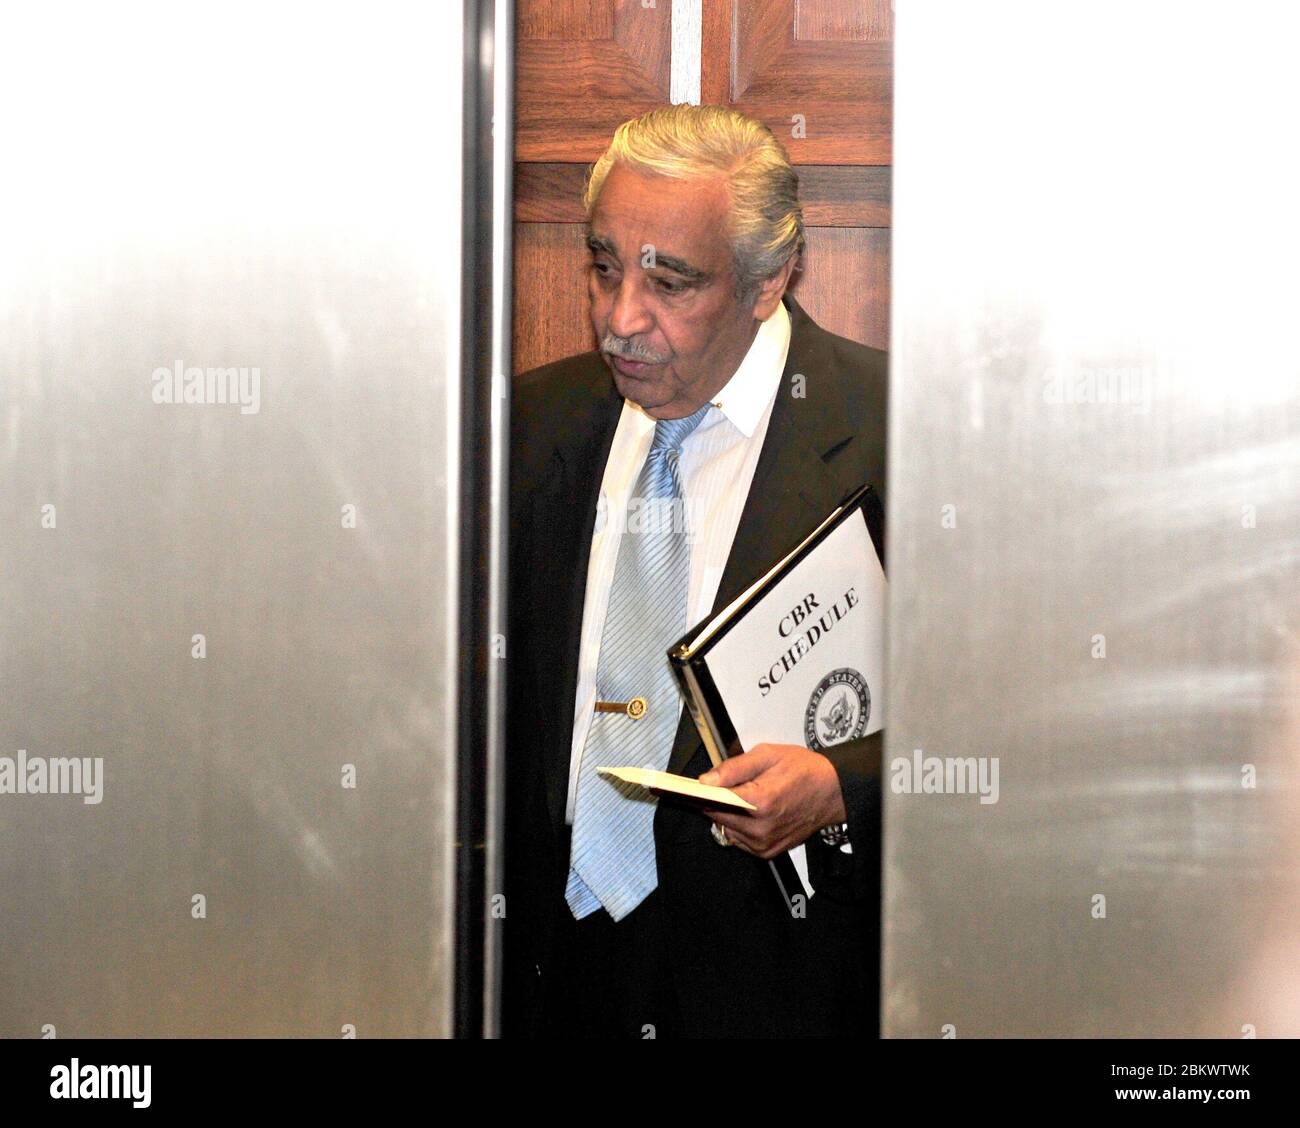 United States Representative Charlie Rangel (Democrat of New York) in an elevator near at his Capitol Hill office on Wednesday, December 1, 2010.Credit: Ron Sachs / CNP  (RESTRICTION: NO New York or New Jersey Newspapers or newspapers within a 75 mile radius of New York City) / MediaPunch Stock Photo